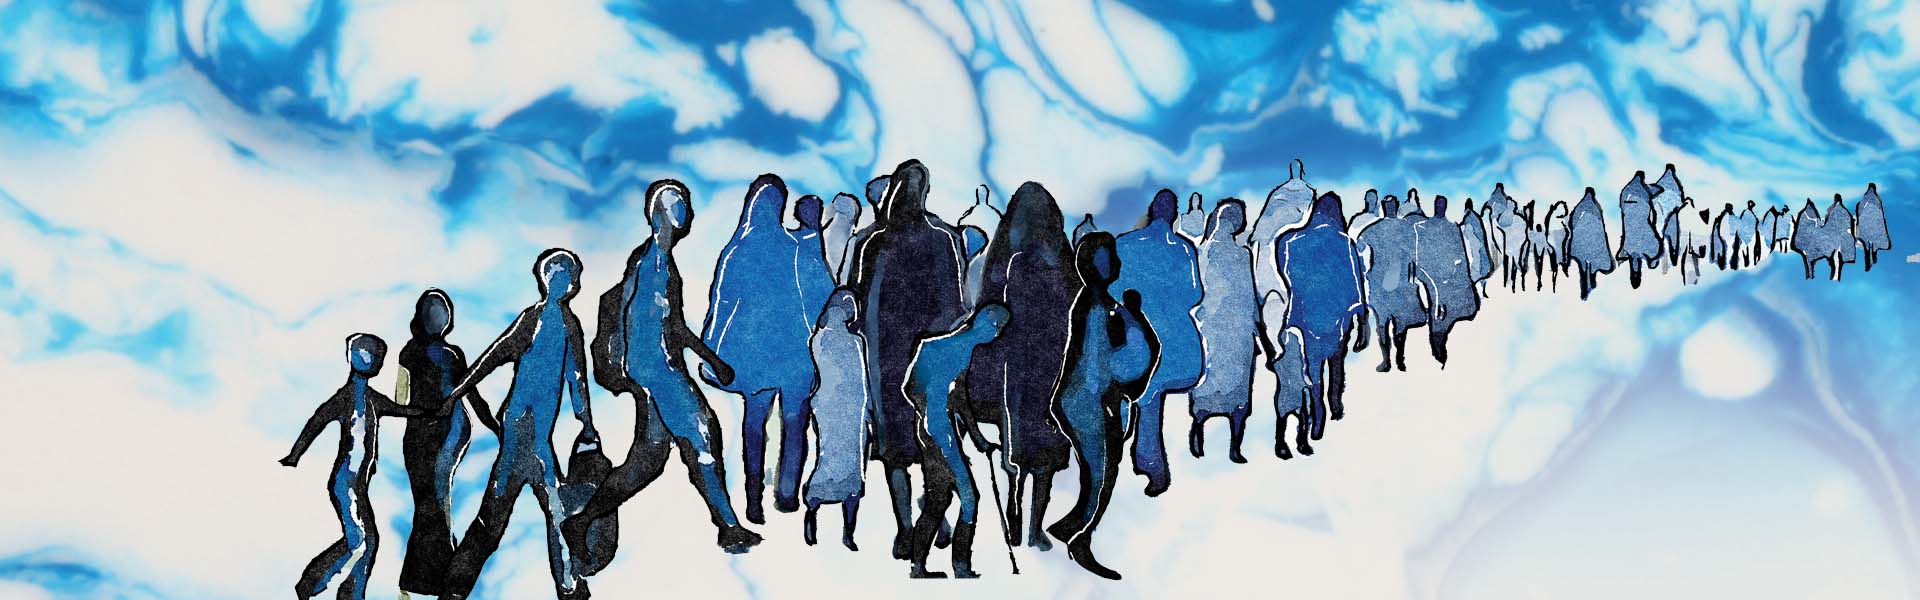 Illustration of a group of people walking